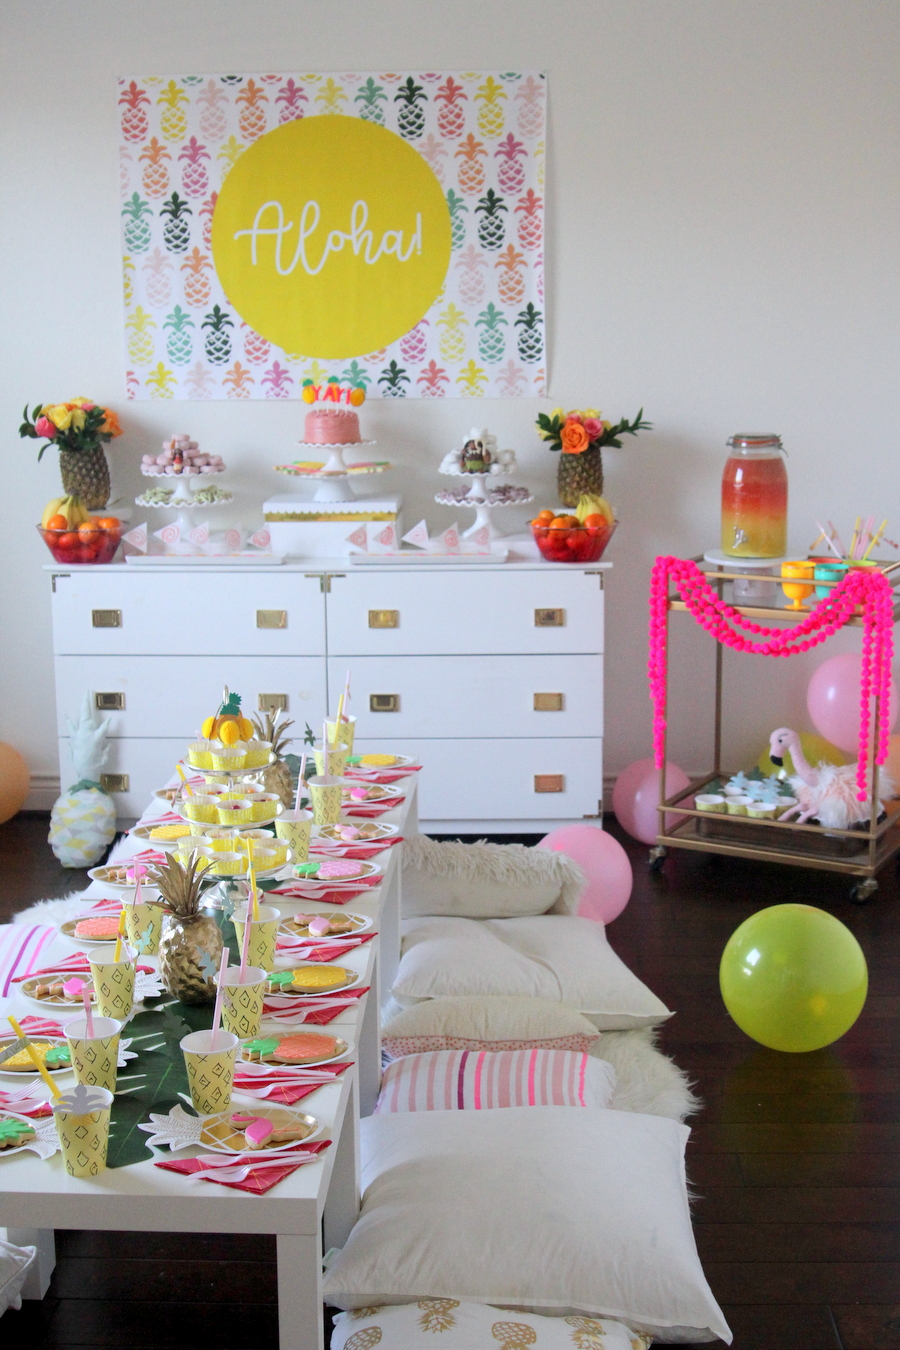 Moana kid's birthday party (with tons of pineapple party decor and a luau vibe)